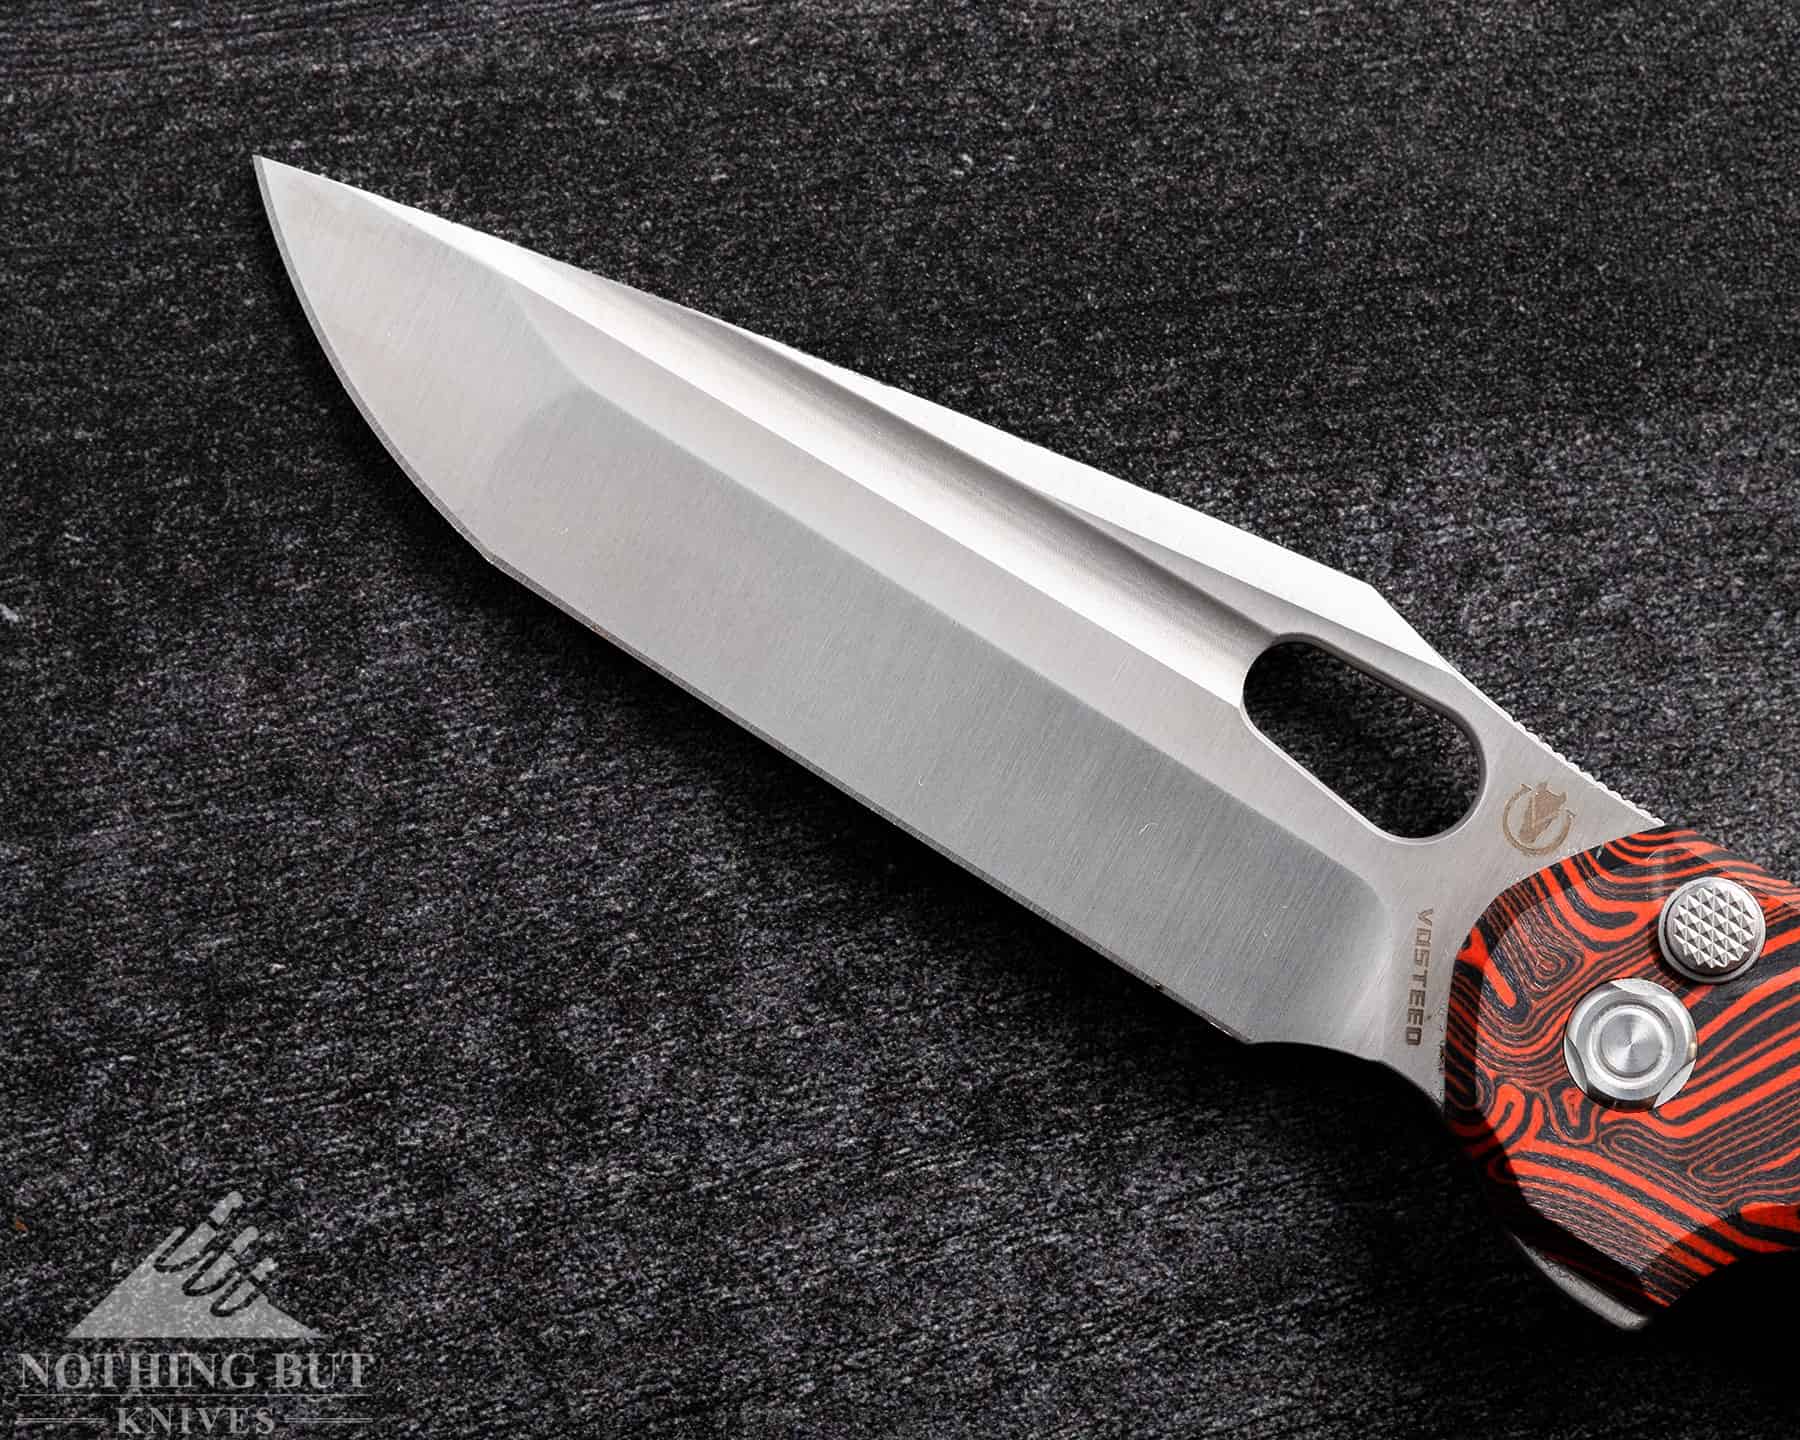 The Thunderbird blade is made of S35VN stee.